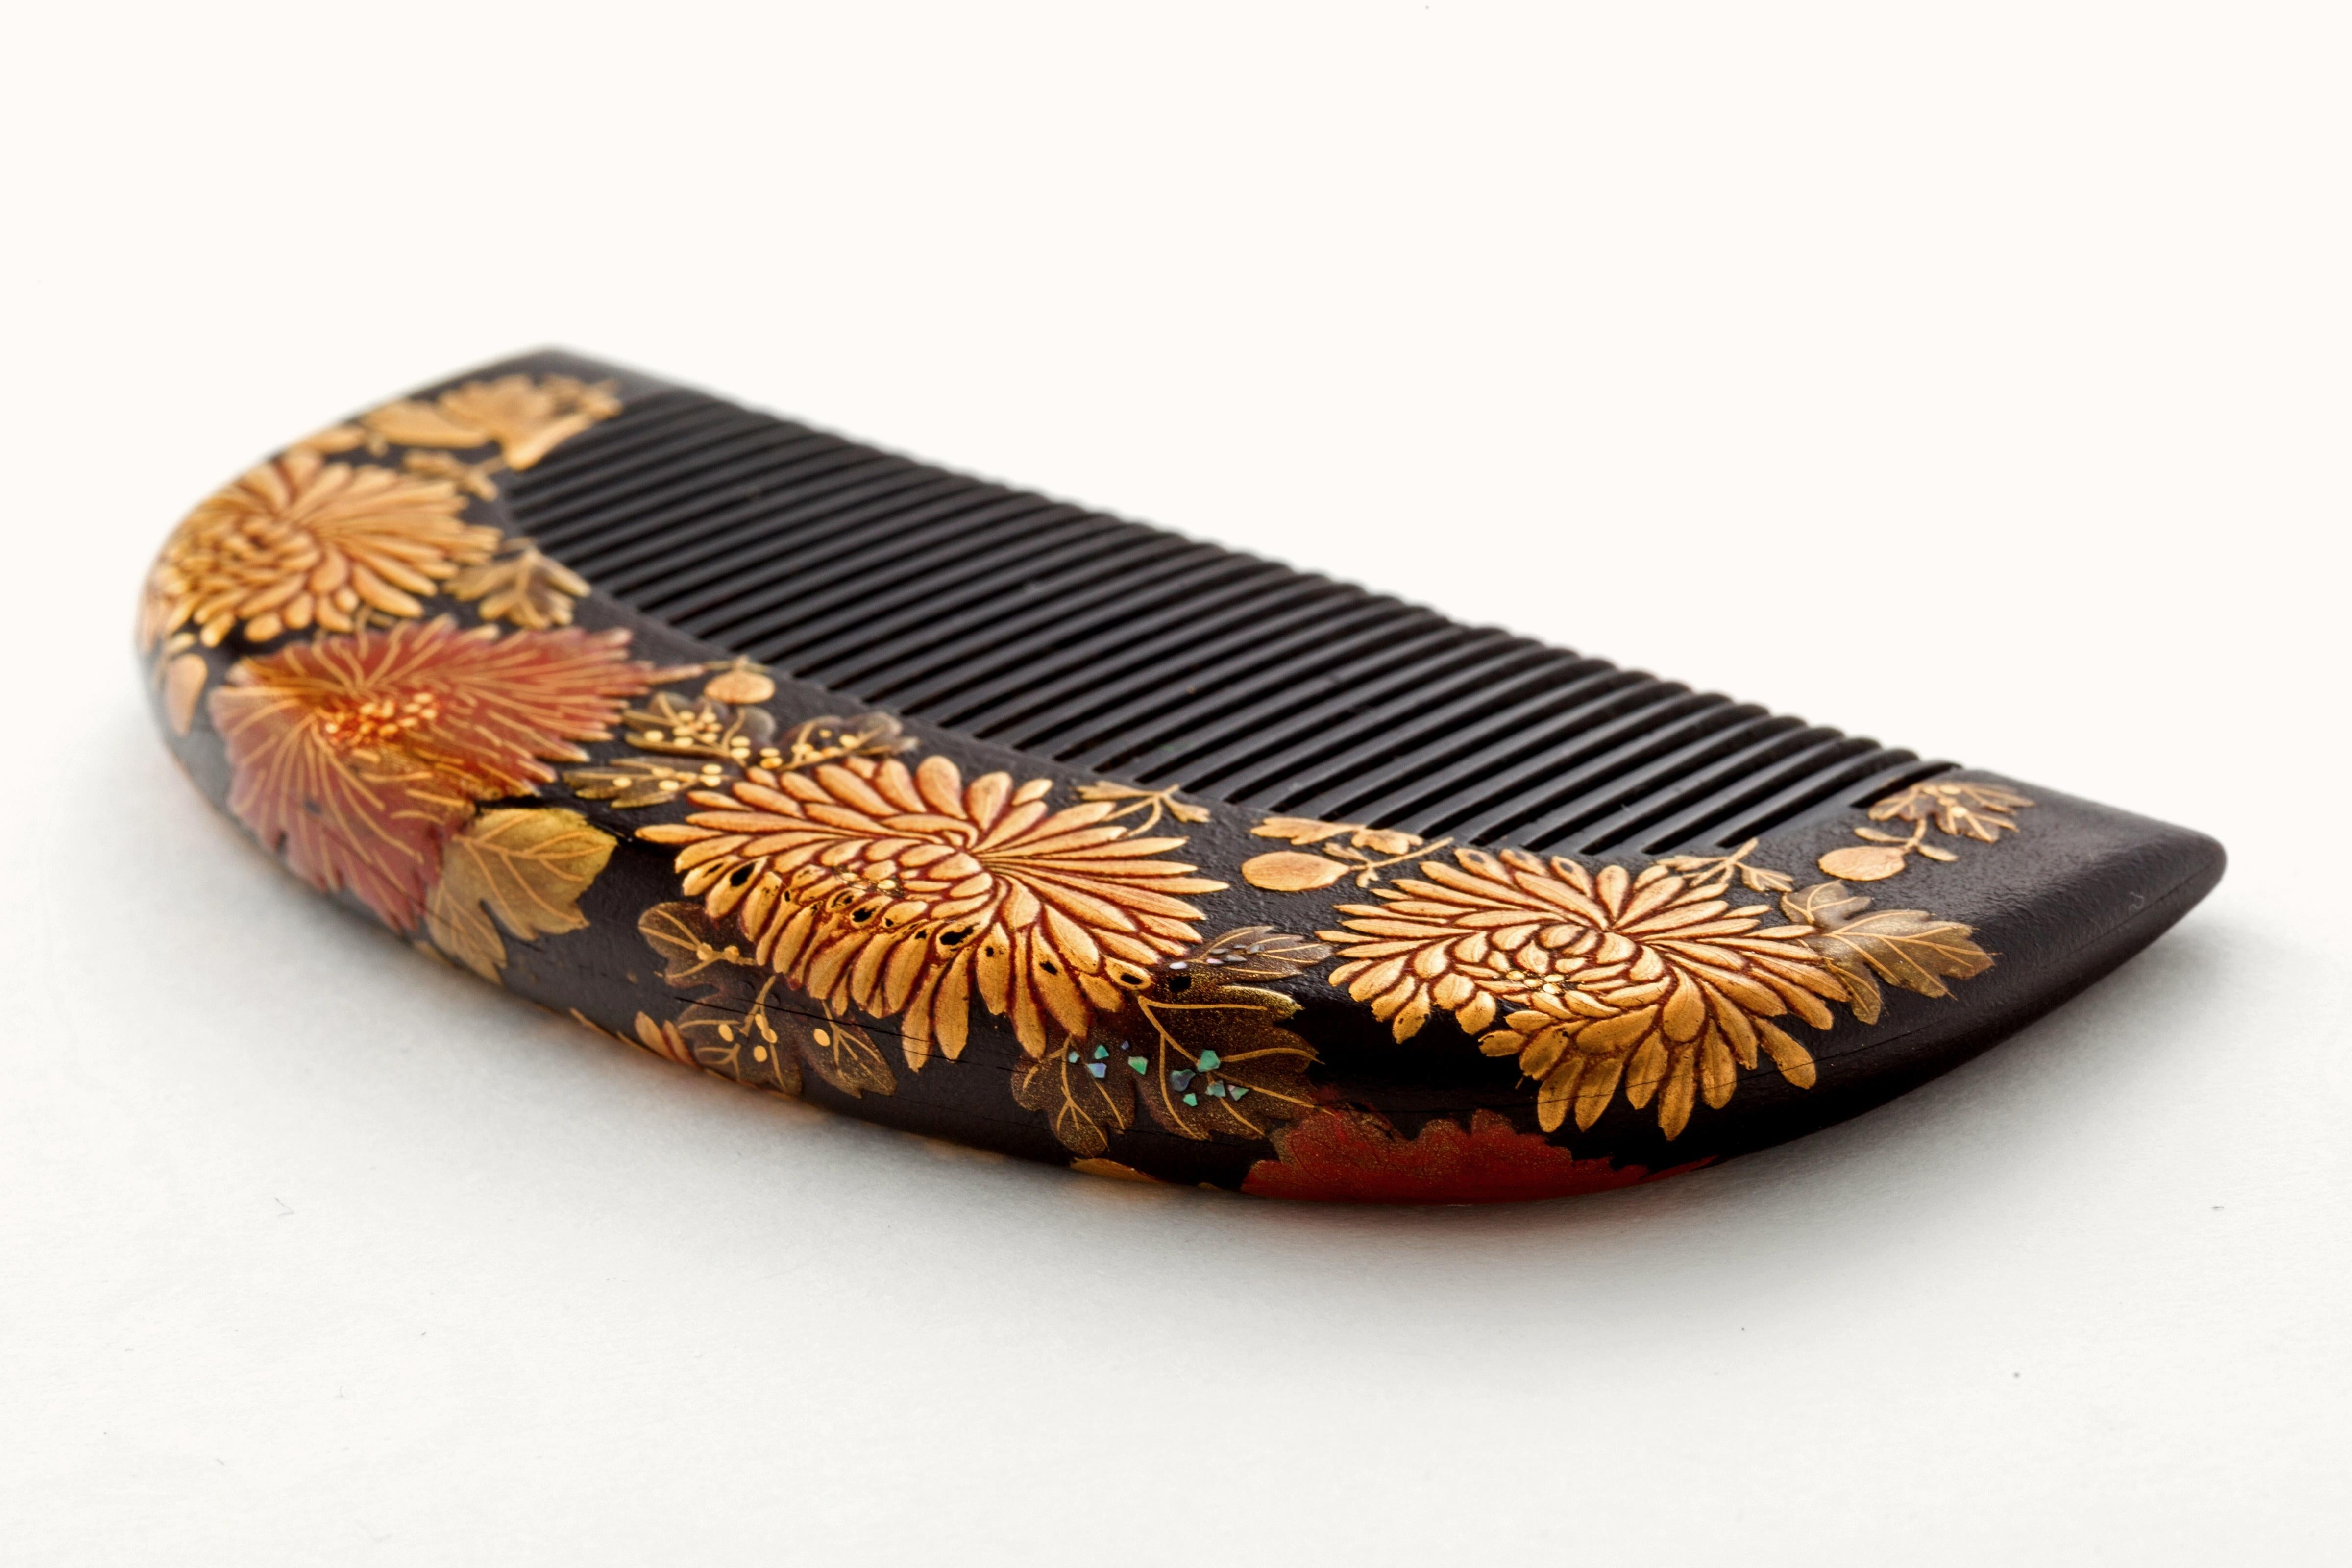 Stunning antique Japanese lacquer hair comb with a geometric petal-like background of stylized chrysanthemums and flowers done in gold and red maki-e. Possibly Edo or Meiji time period. From the estate of a Broadway Producer. Exceptional